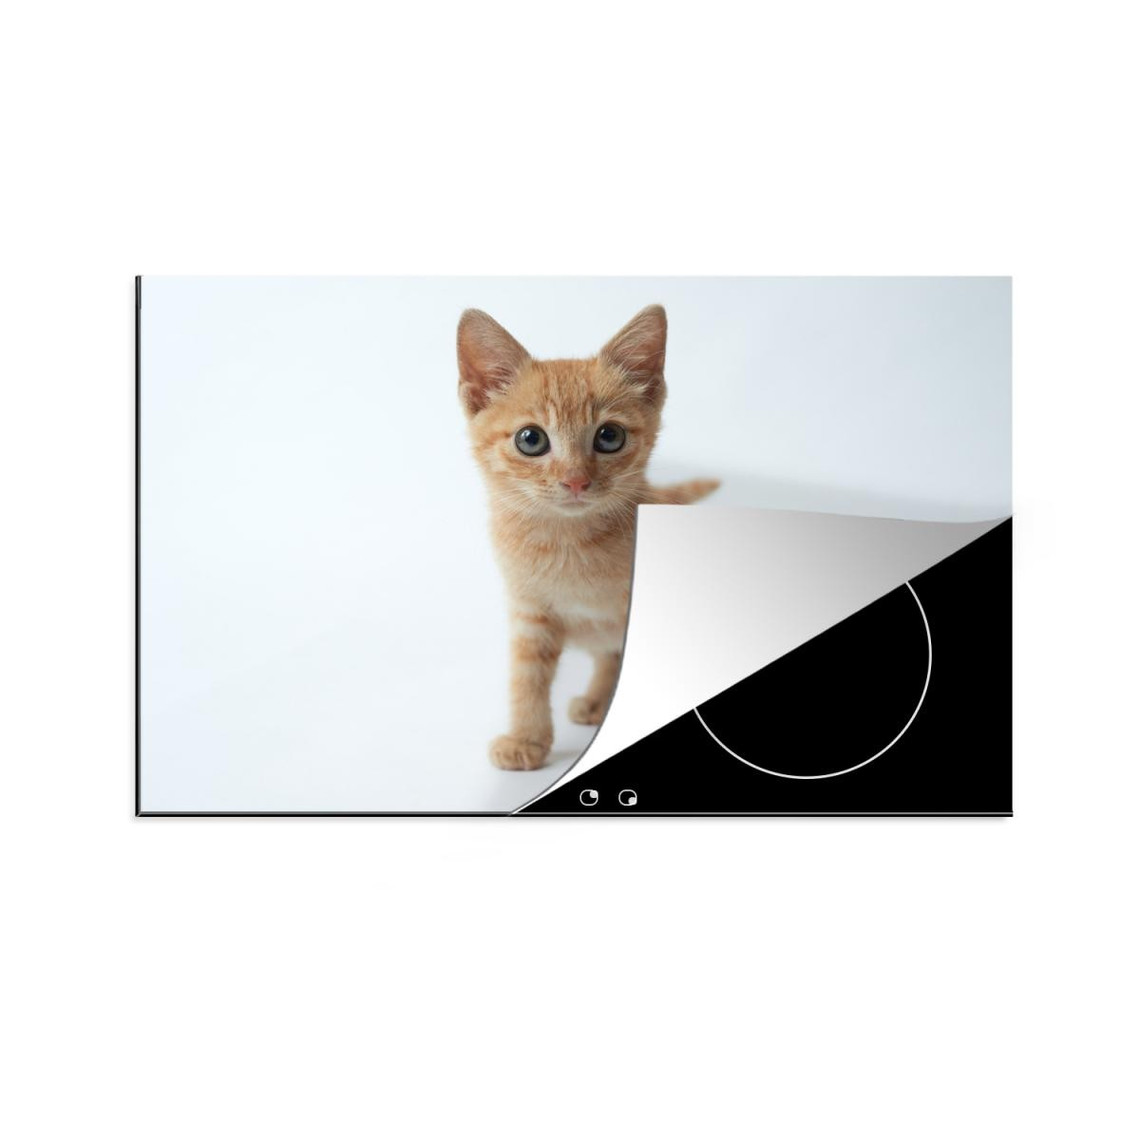 MuchoWow Tapis plaque induction Chat - Rouge - Chaton Protection plaque induction 78x52 cm Protege plaque induction